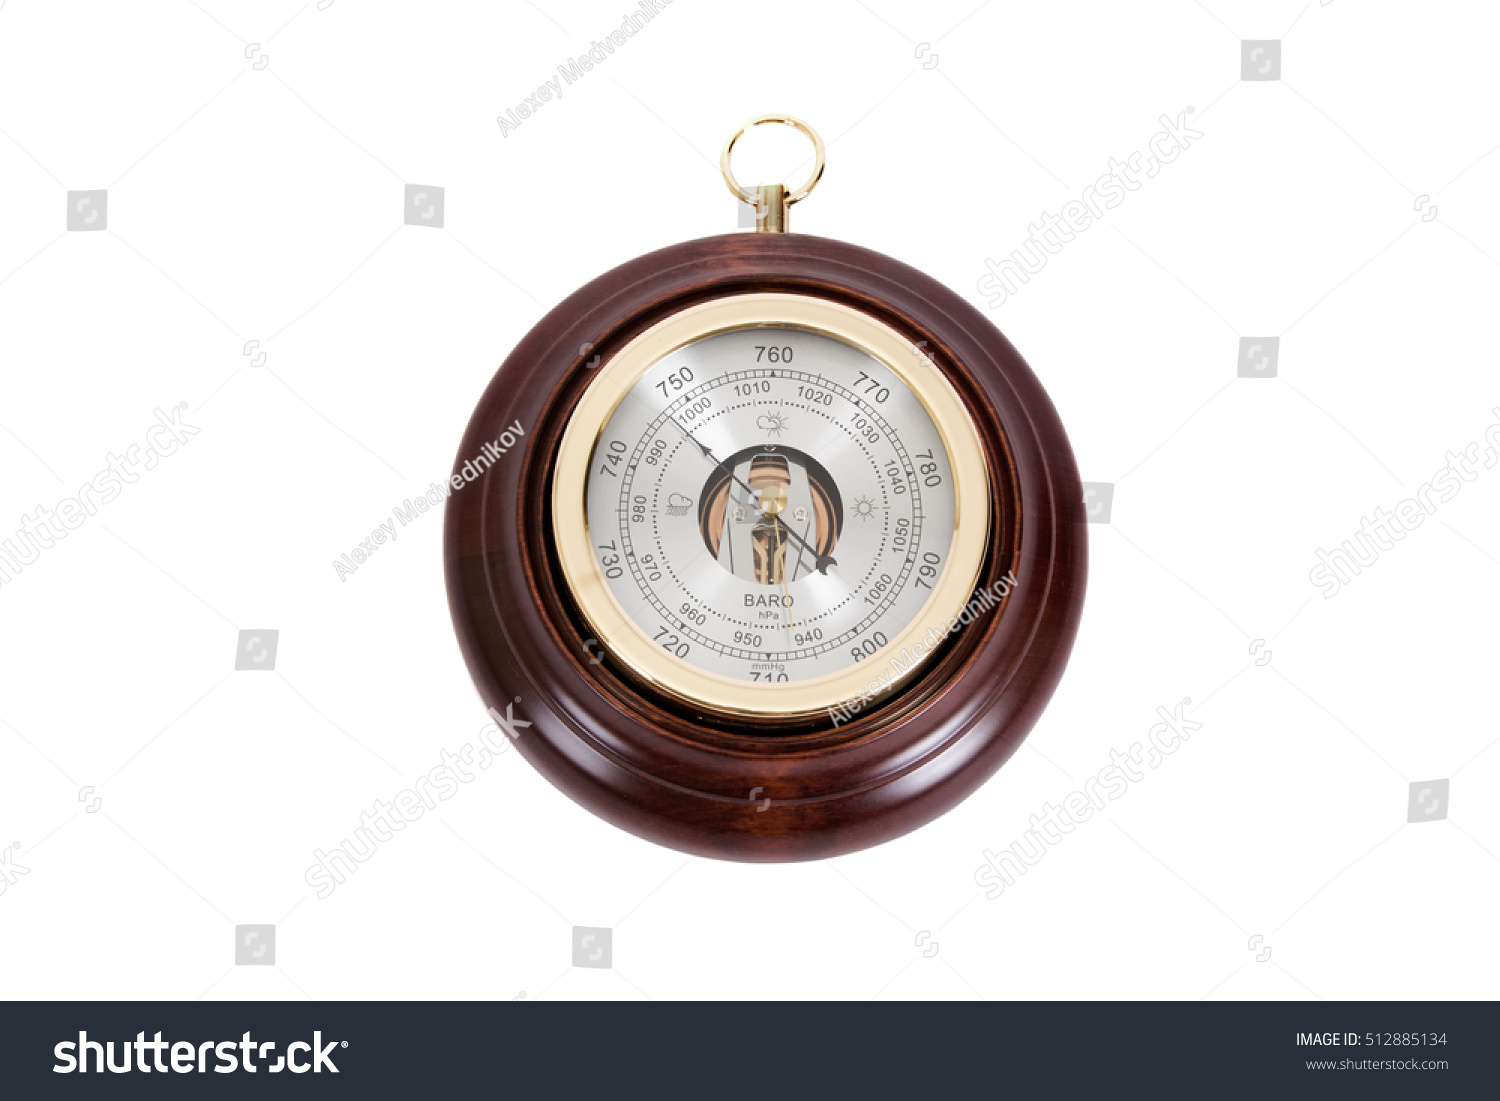 Vintage wooden wall barometer on a white background #512885134